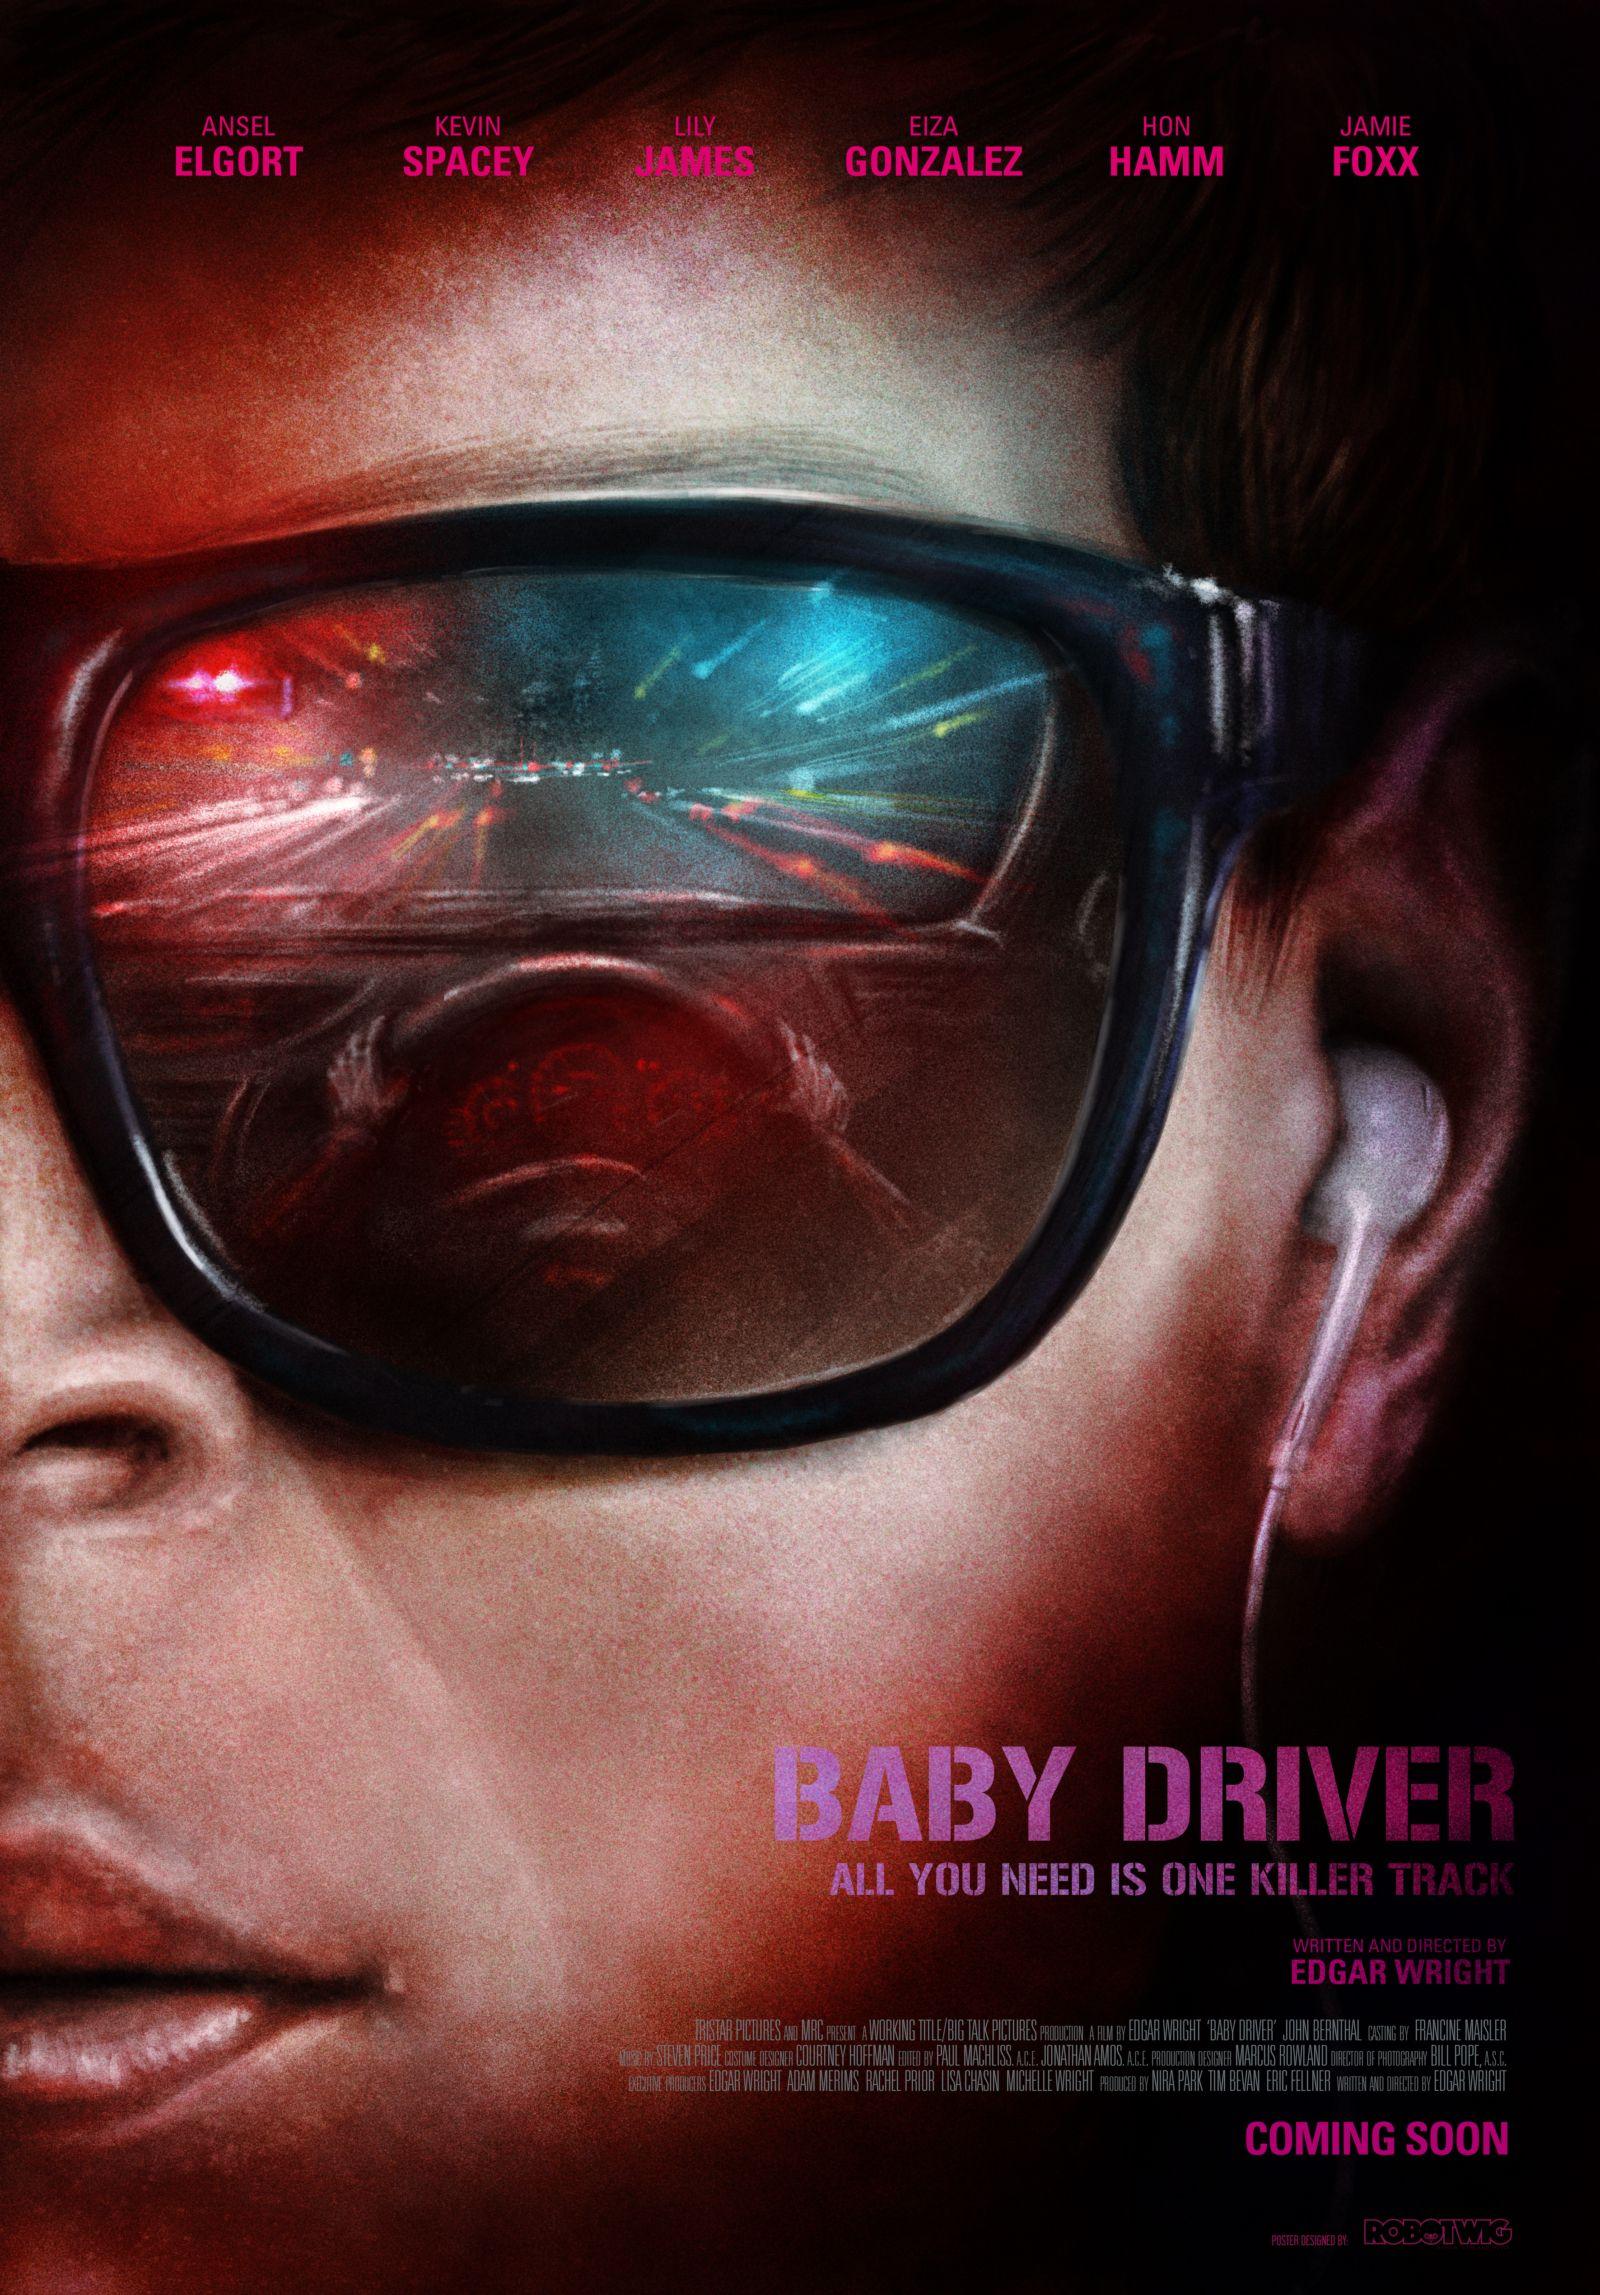 Baby Driver (2017) HD Wallpaper From Gallsource.com. Movie